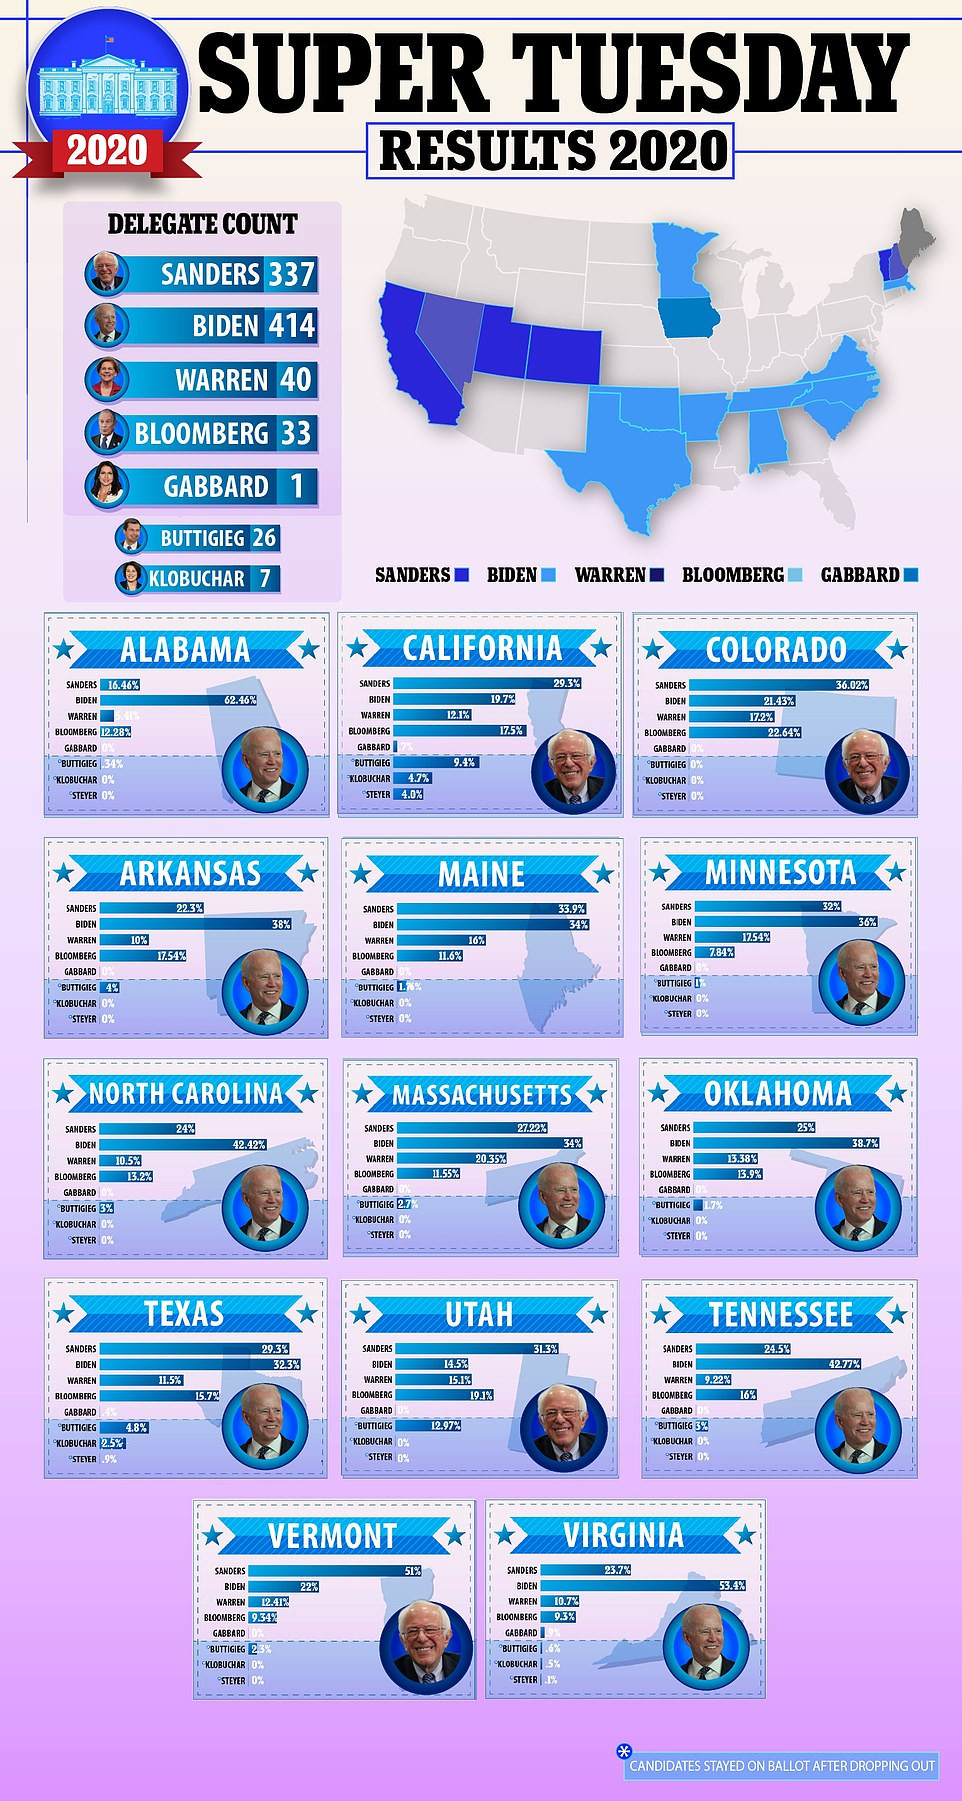 Joe Biden is back again! Former VP wins over 8 states as he and Bernie Sanders become leading candidates to clinch democratic party presidential ticket